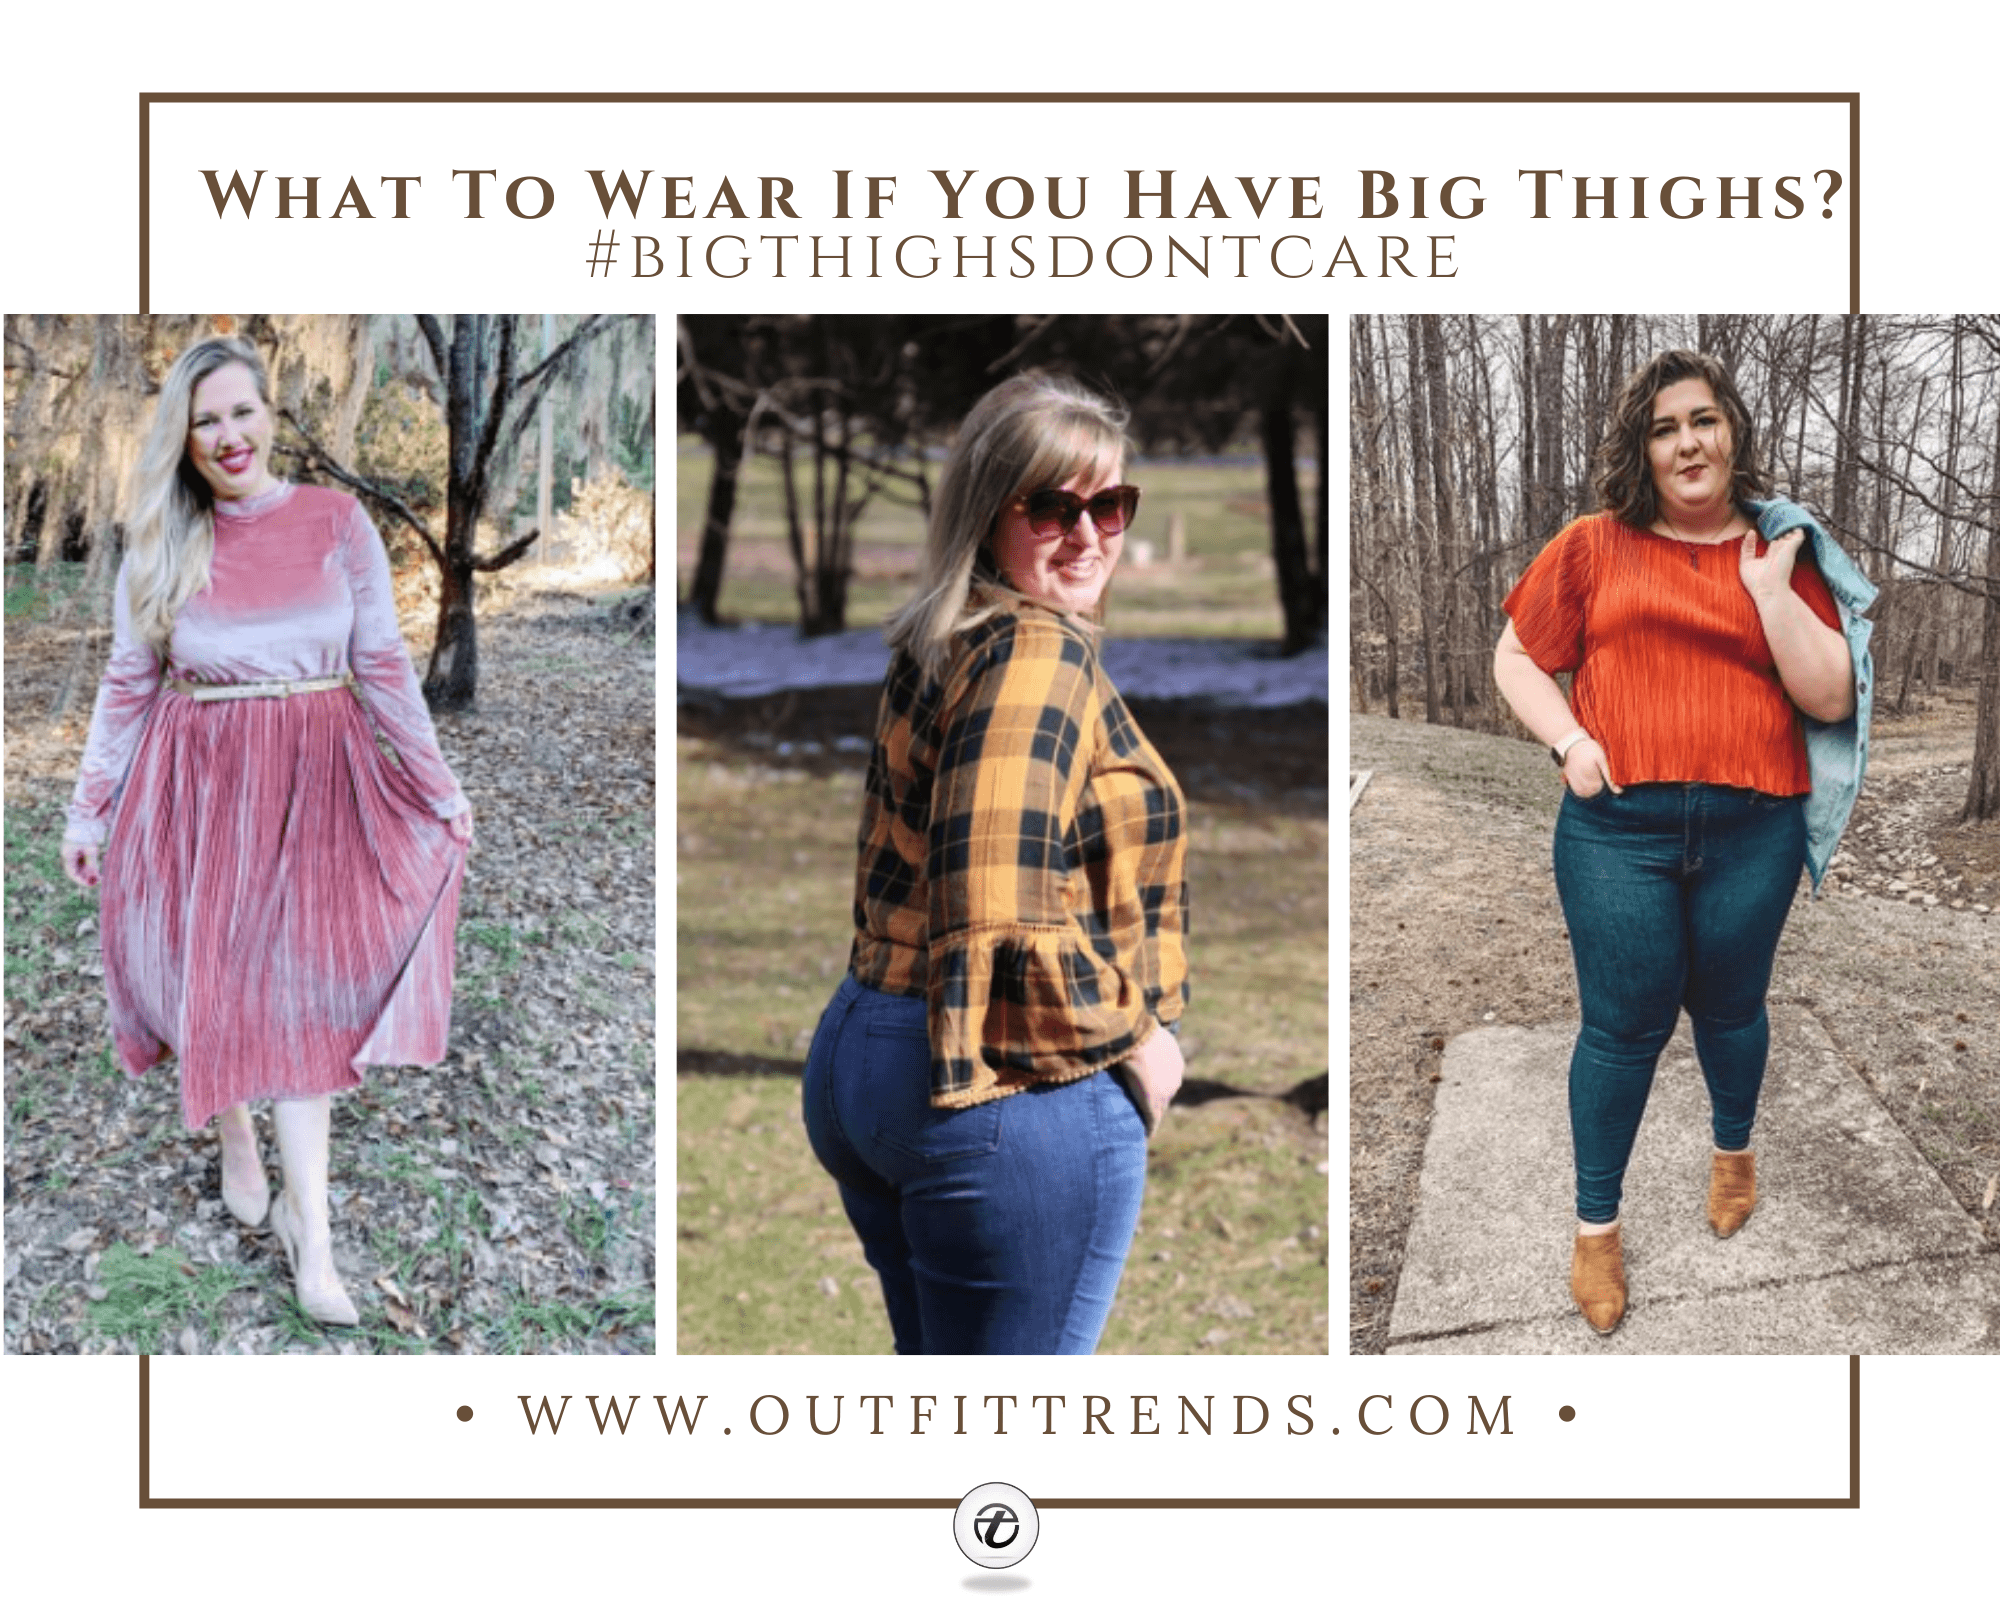 30 Best Outfits For Women With Big Thighs To Wear in 2021